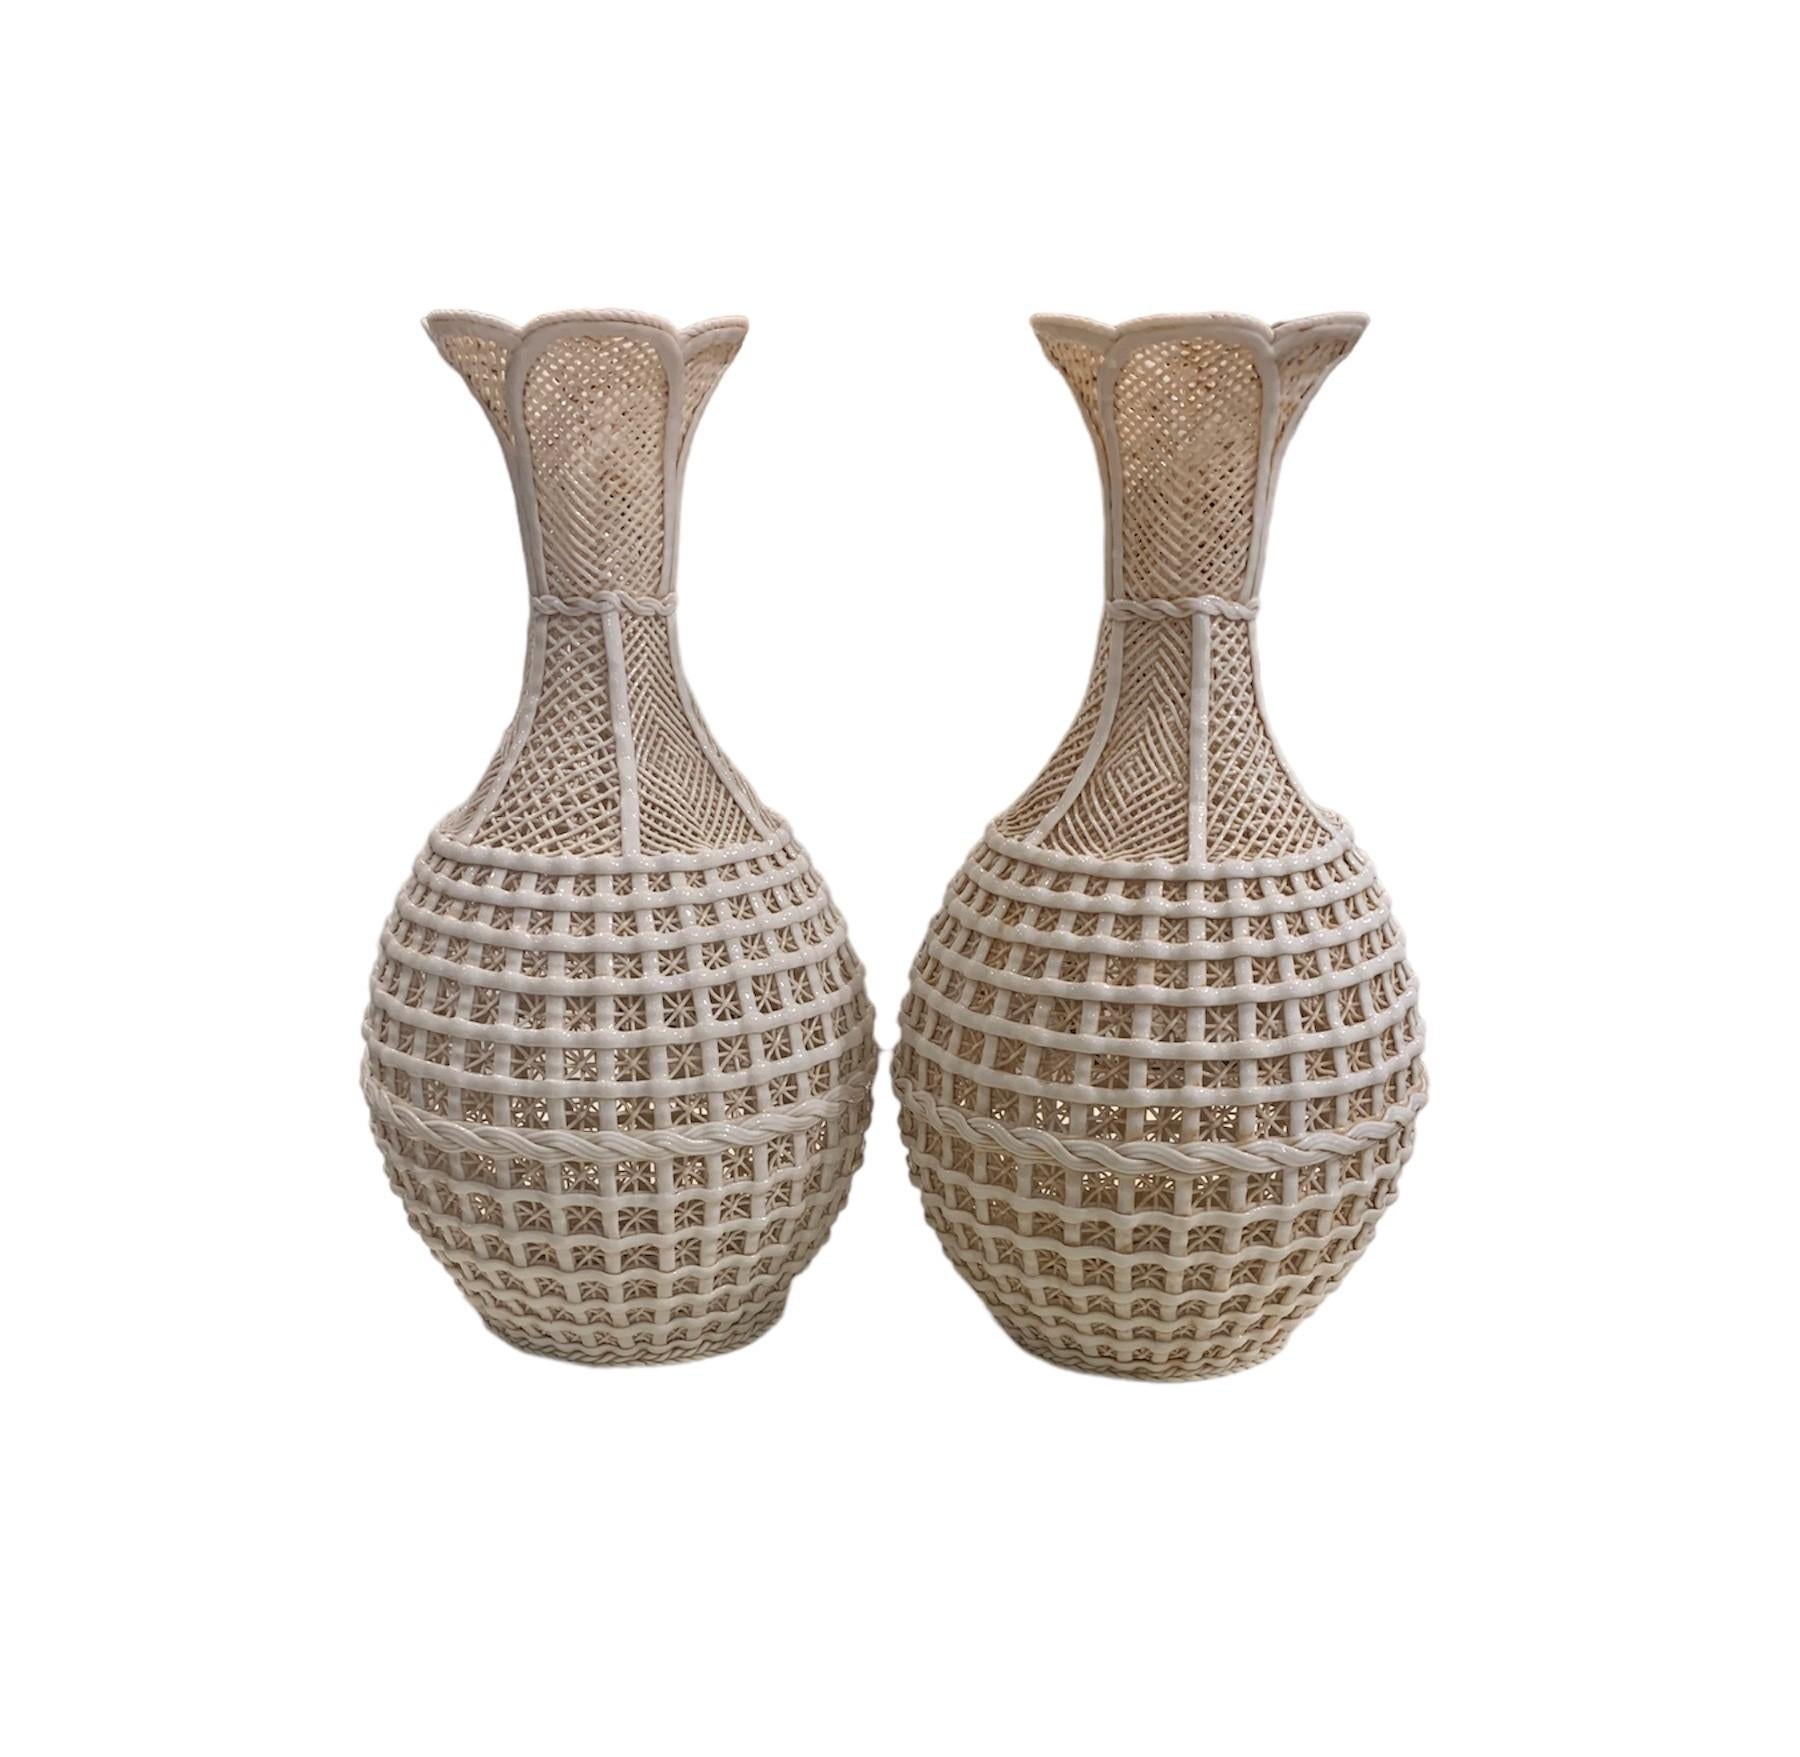 20th Century Pair of Blanc de Chinese Dehua kiln Porcelain Vases, early Republic Period  For Sale